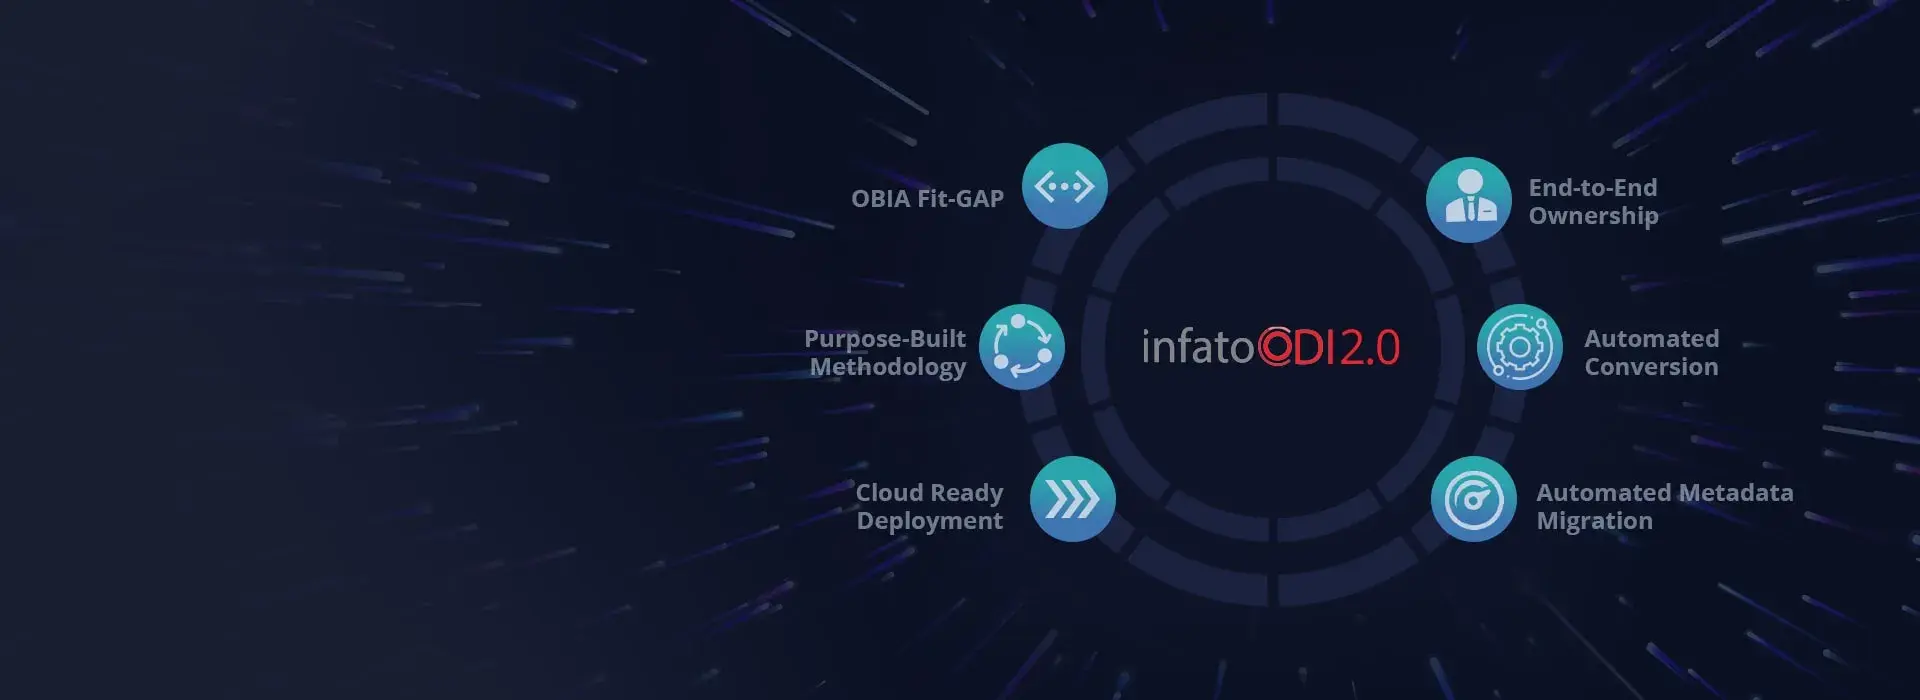 Learn how to accelerate Oracle BI Applications